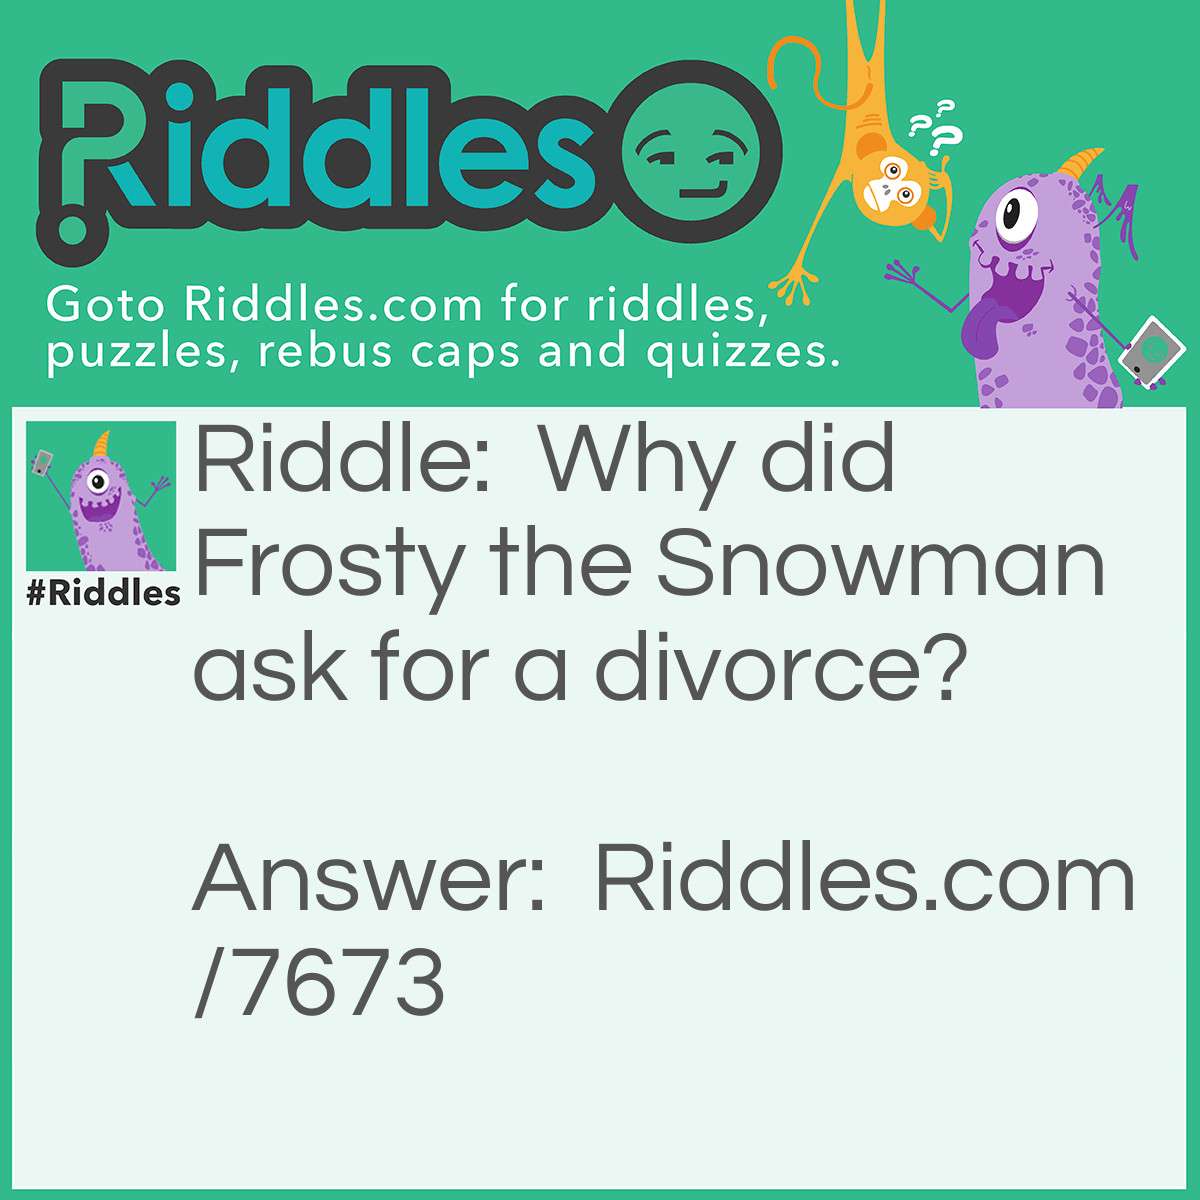 Riddle: Why did Frosty the Snowman ask for a divorce? Answer: Because his wife was a total flake.